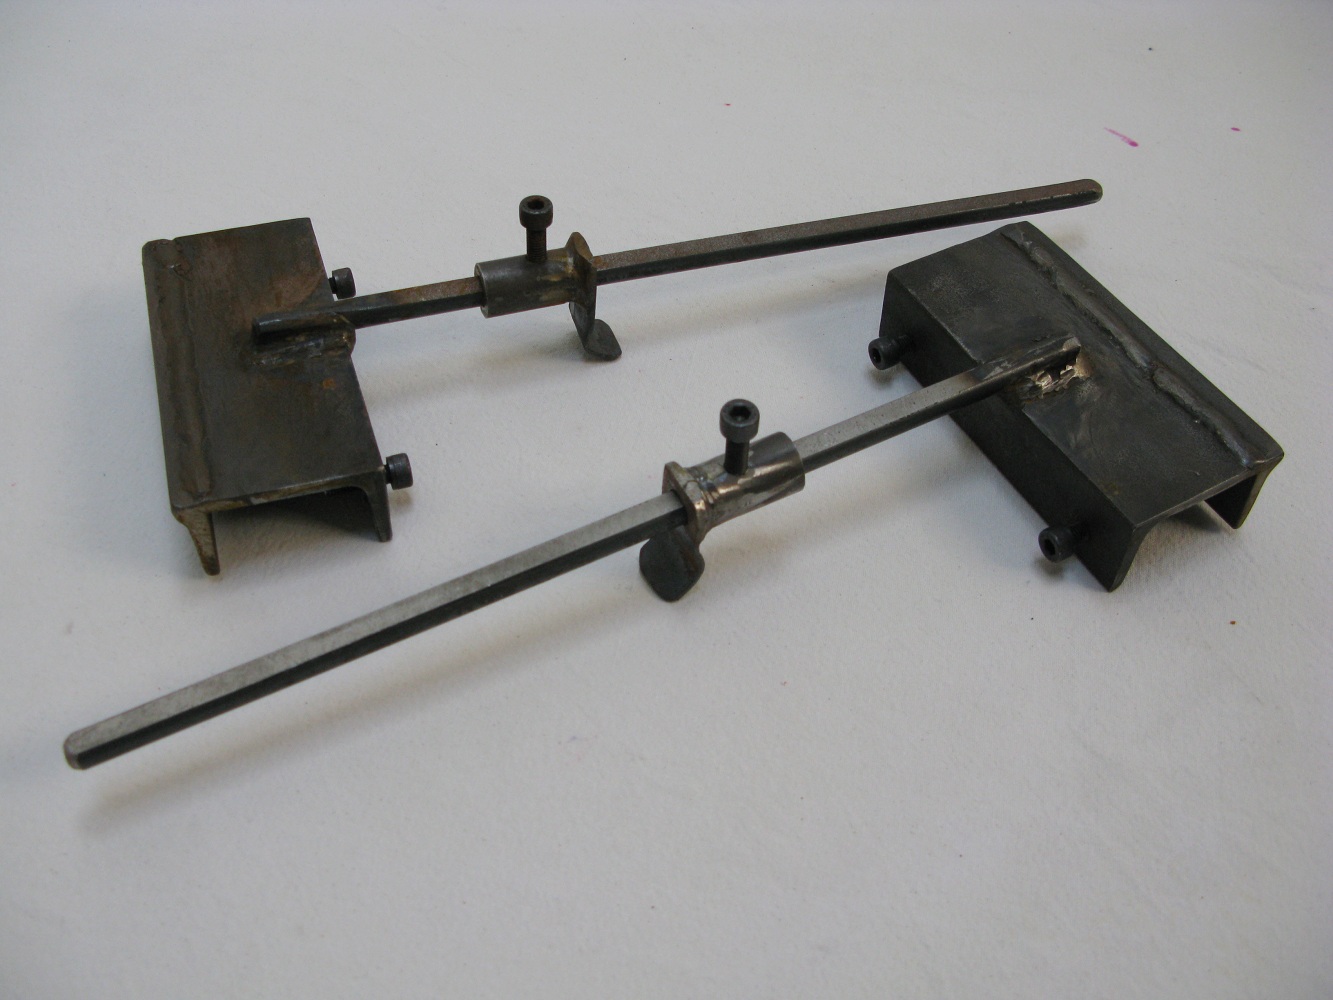 Screen clamps made from mild steel